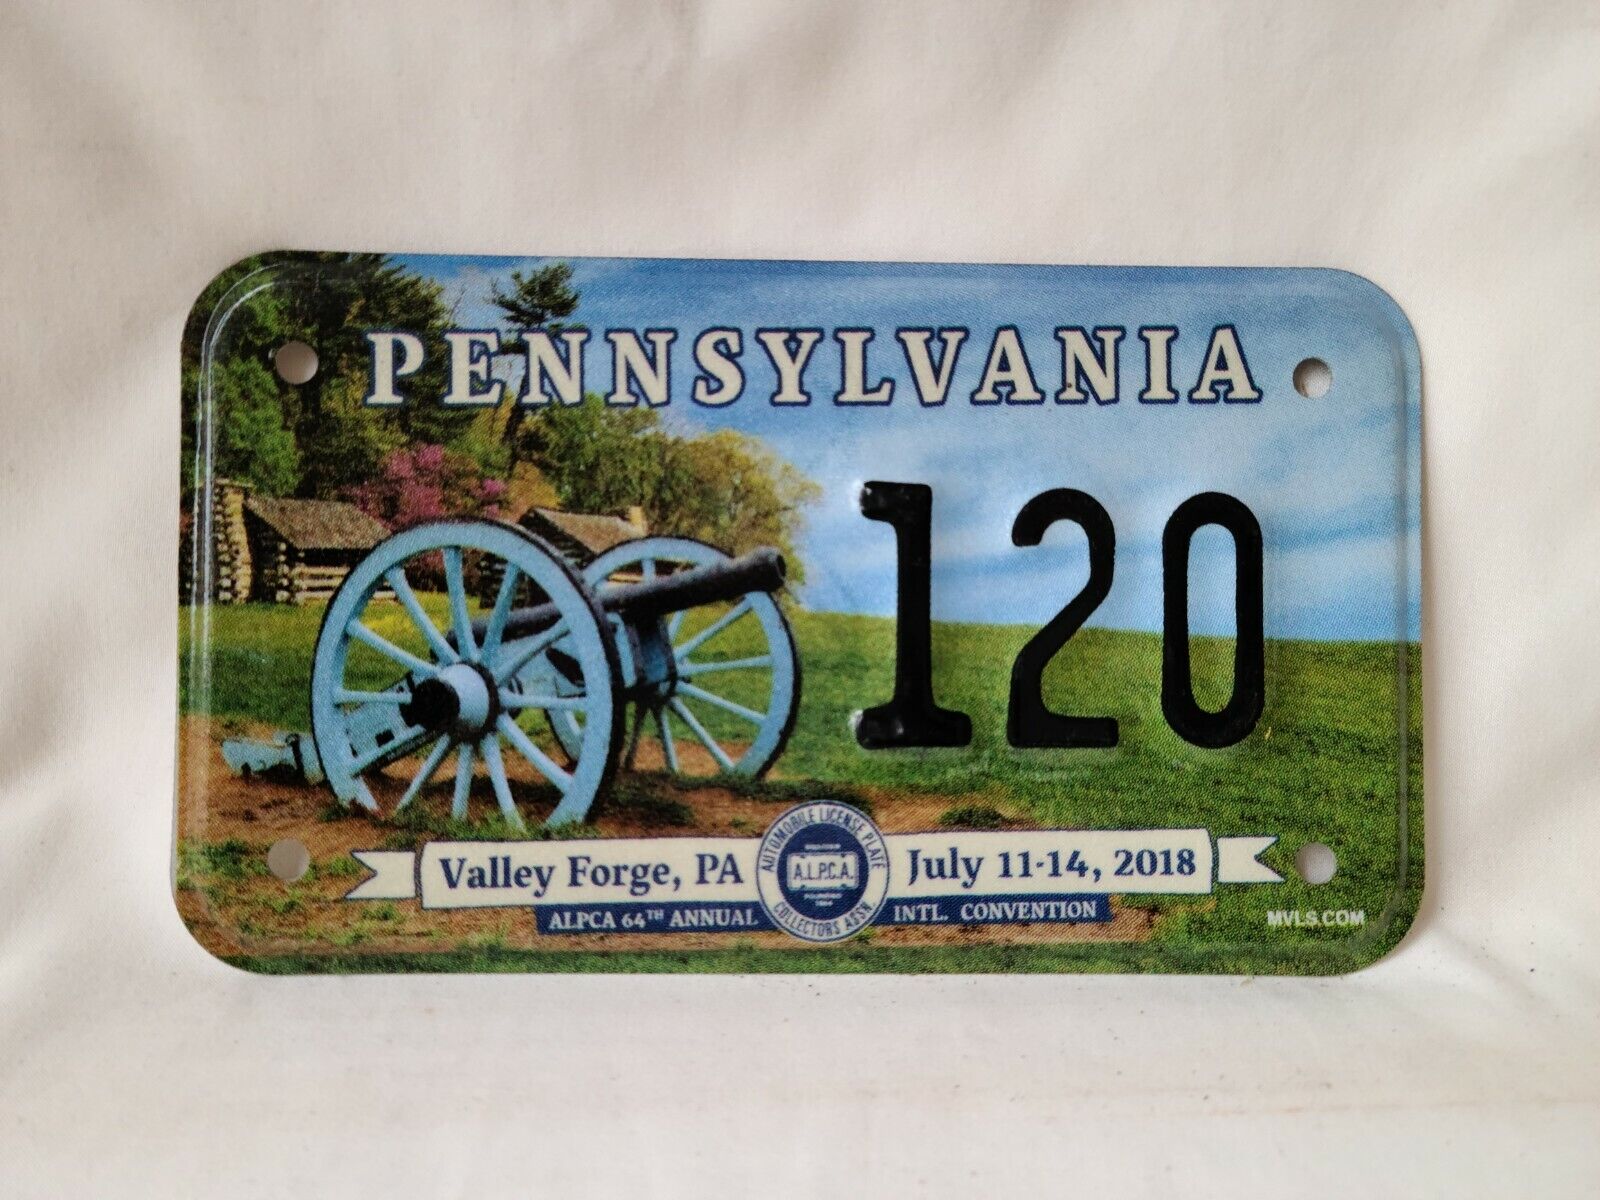 2018 Pennsylvania Valley Forge #120 Motorcycle Souvenir License Plate 0322